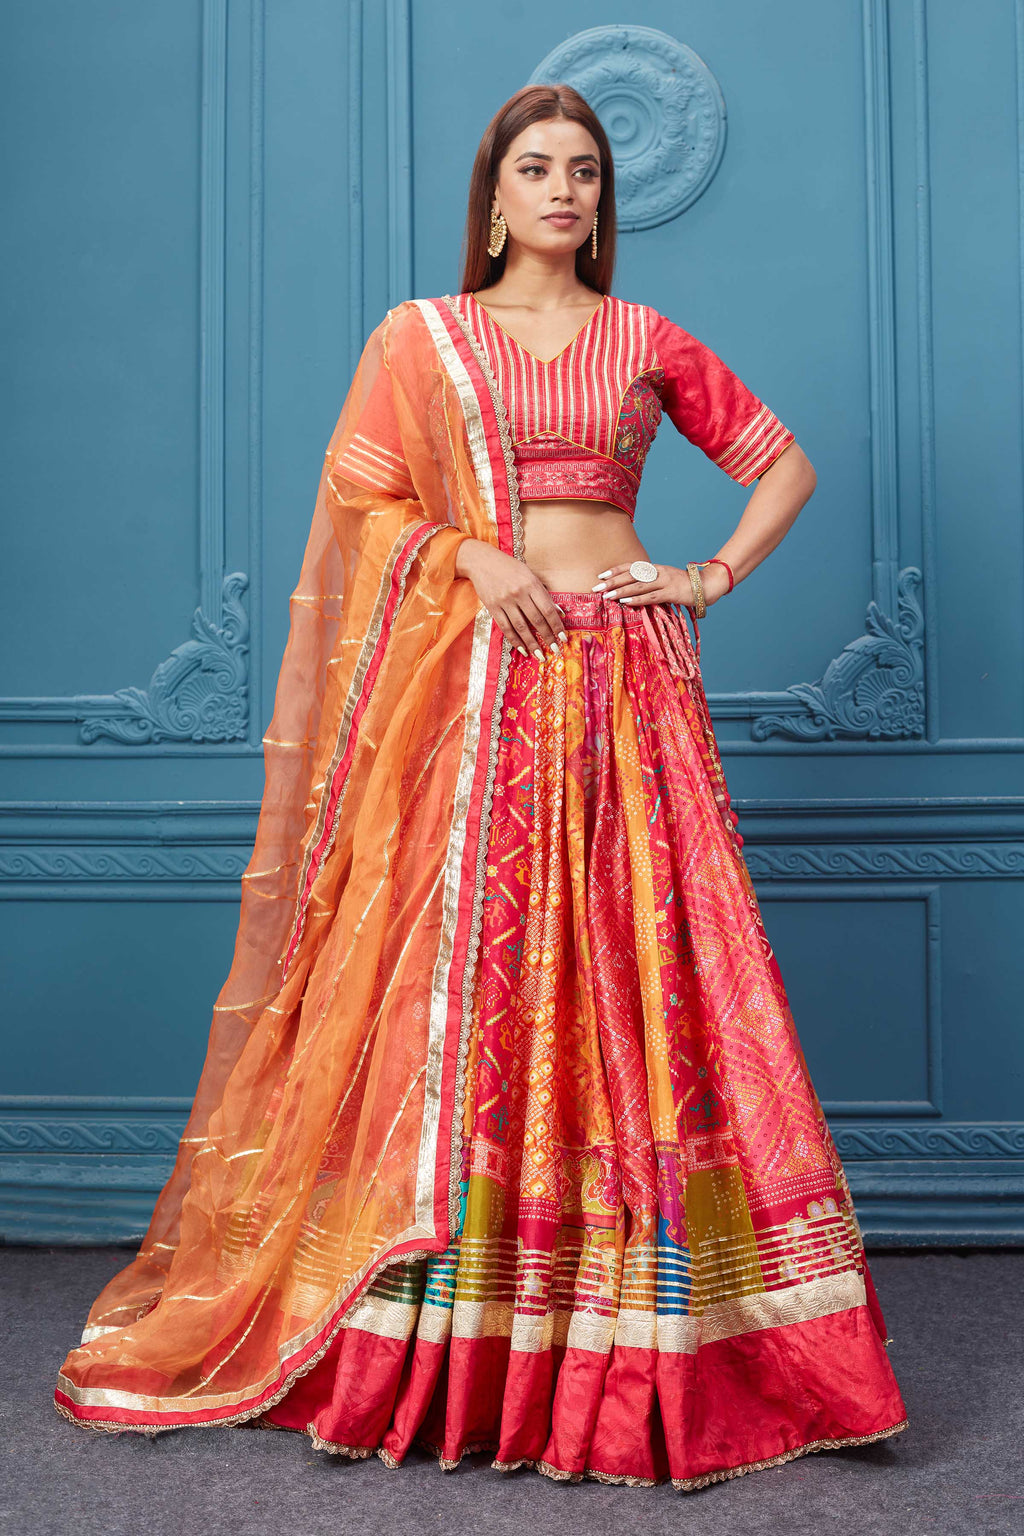 Buy this Red embroidered bandhej lehenga with a contrasting orange dupatta online in the USA. Featuring embroidered blouse with 3/4th sleeves blouse The Lehenga comes with a look royal at weddings and festive occasions in exquisite designer sarees, gowns, lehngas, Anarkali, and suits Pure Elegance Indian saree stores in the USA.